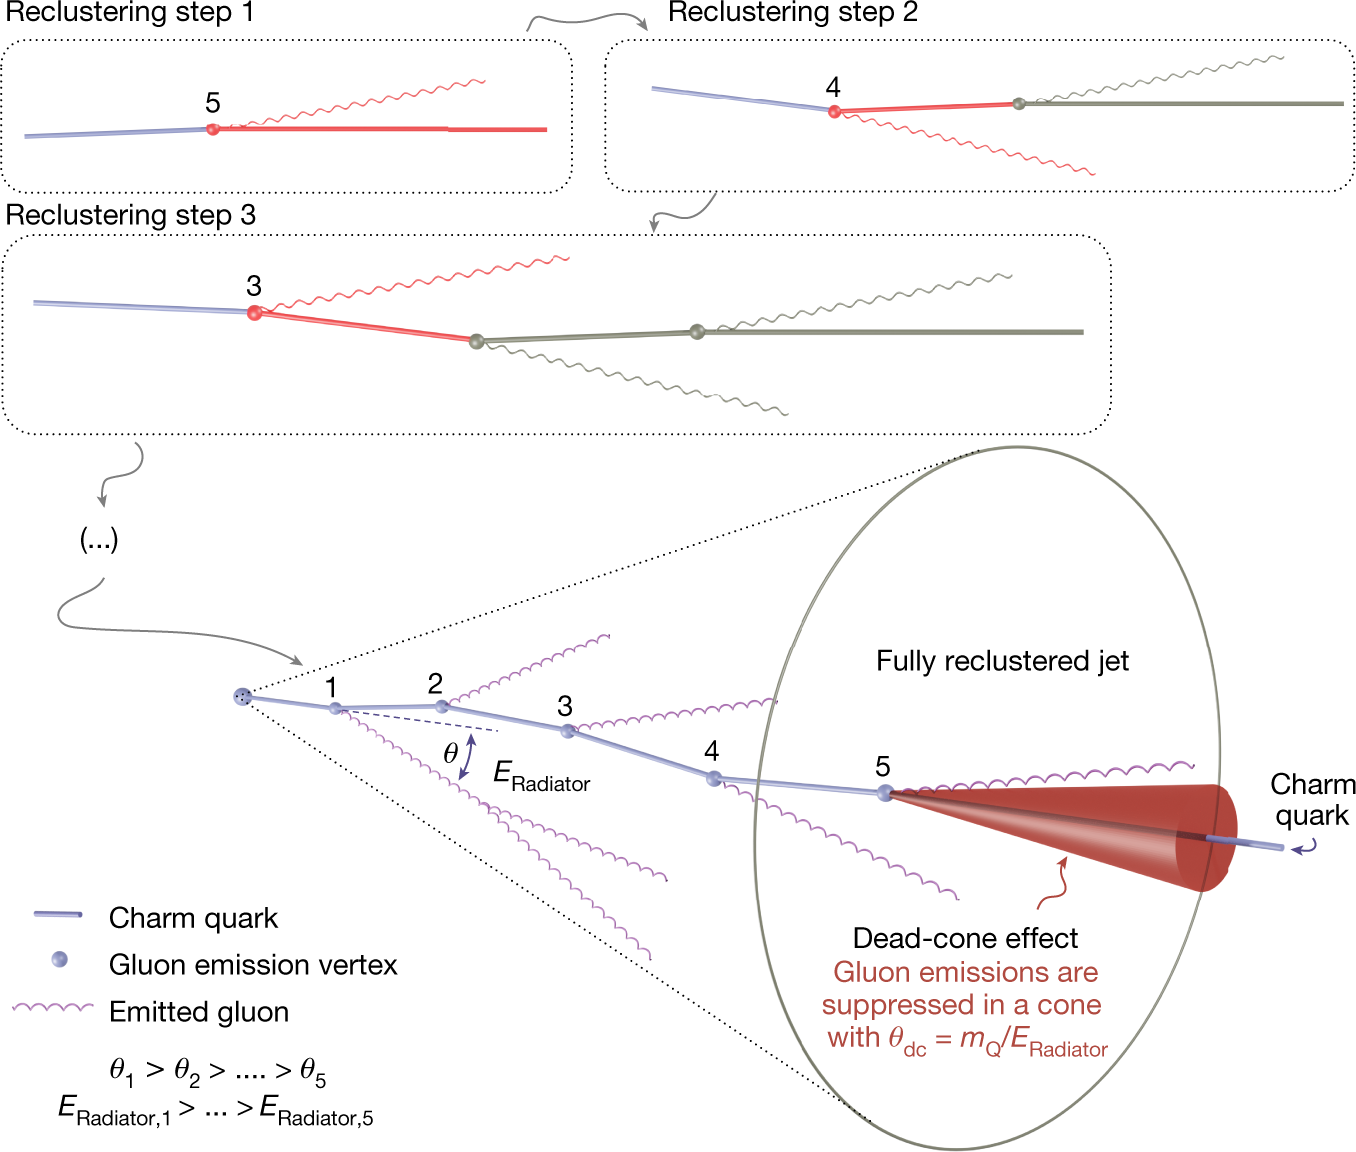 Direct observation of the dead-cone effect in quantum chromodynamics |  Nature